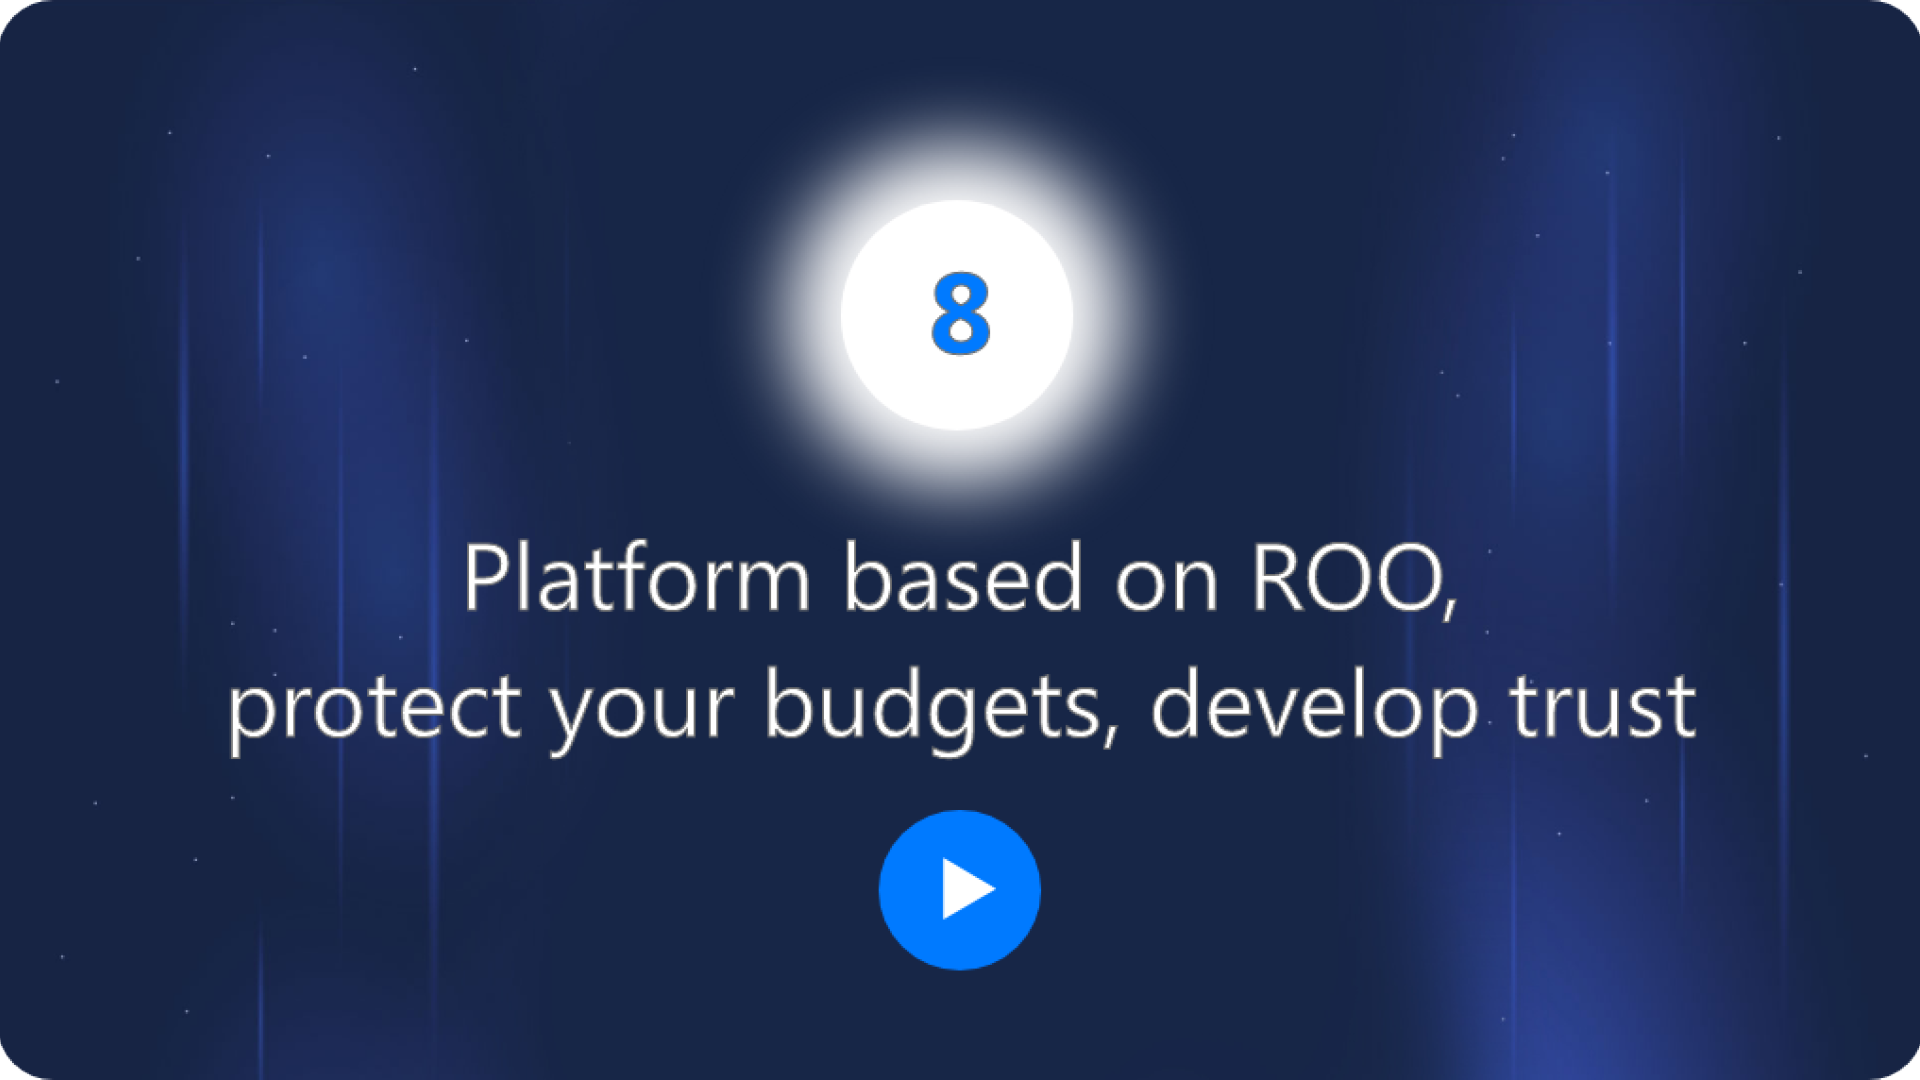 Platform based on ROO, protect your budgets, develop trust